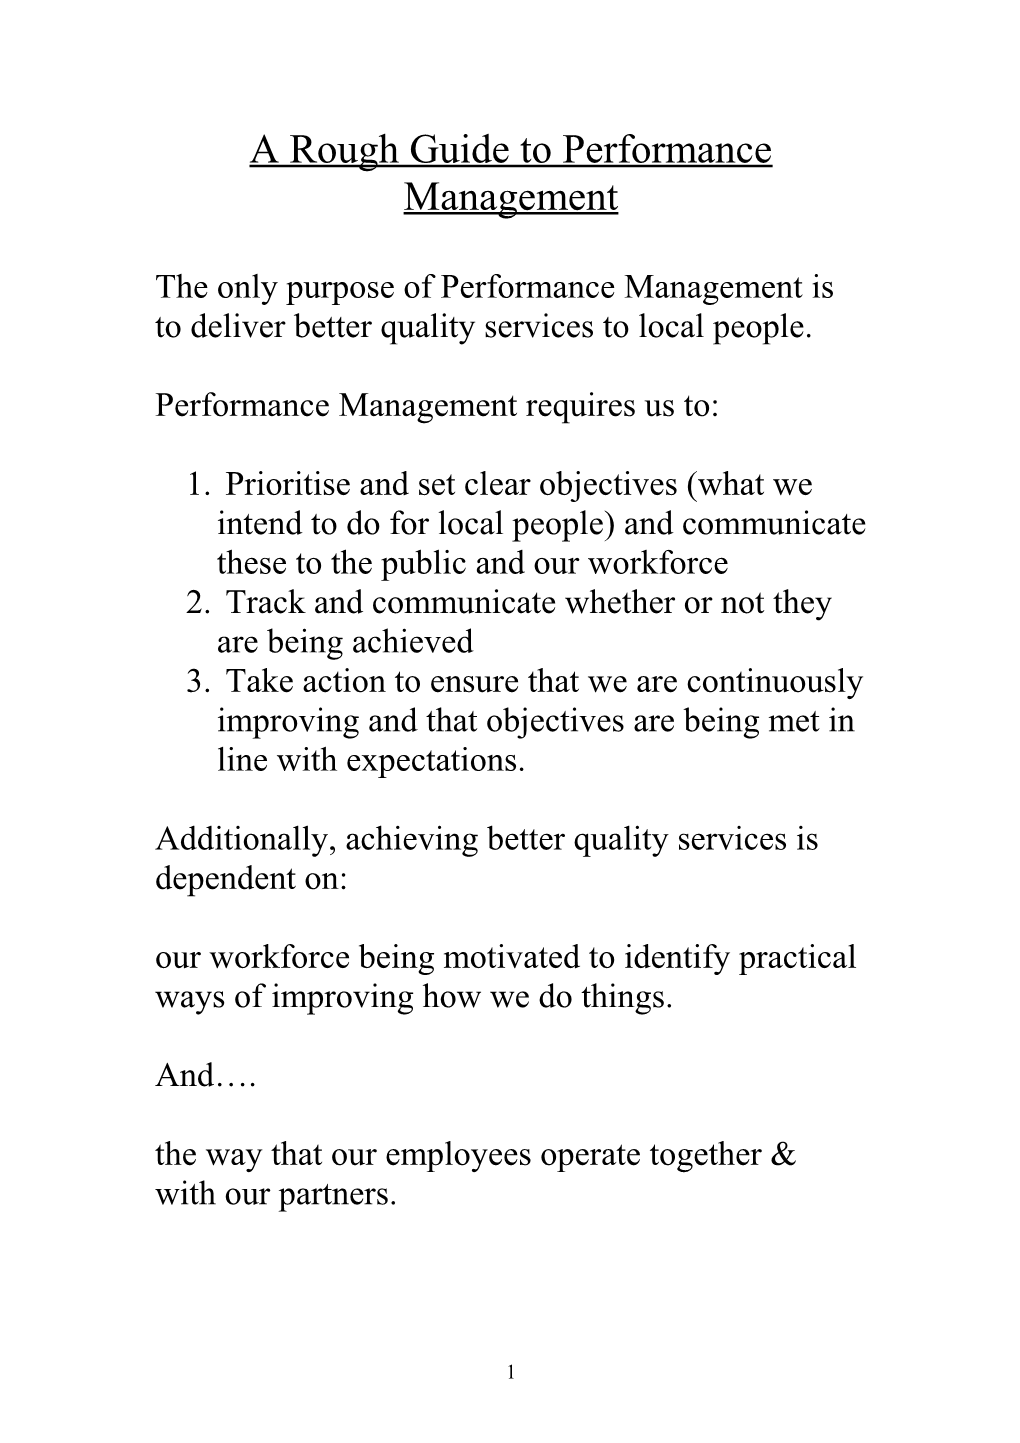 A Rough Guide to Performance Management